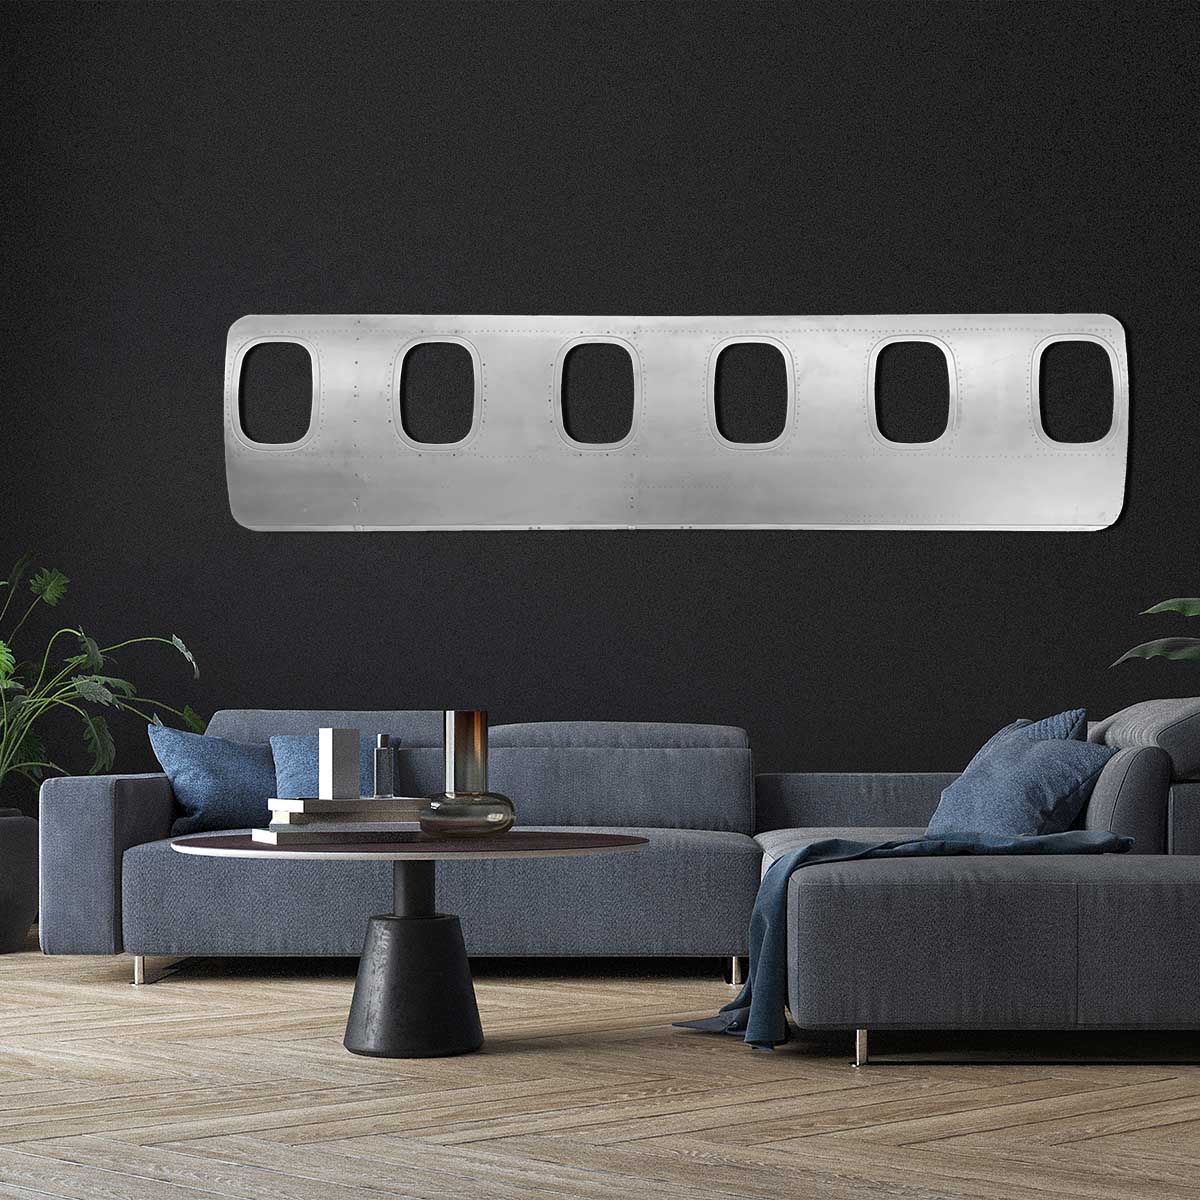 Six-window panel of an ATR passenger aircraft turned into a decorative piece and hanging in a modern living room.